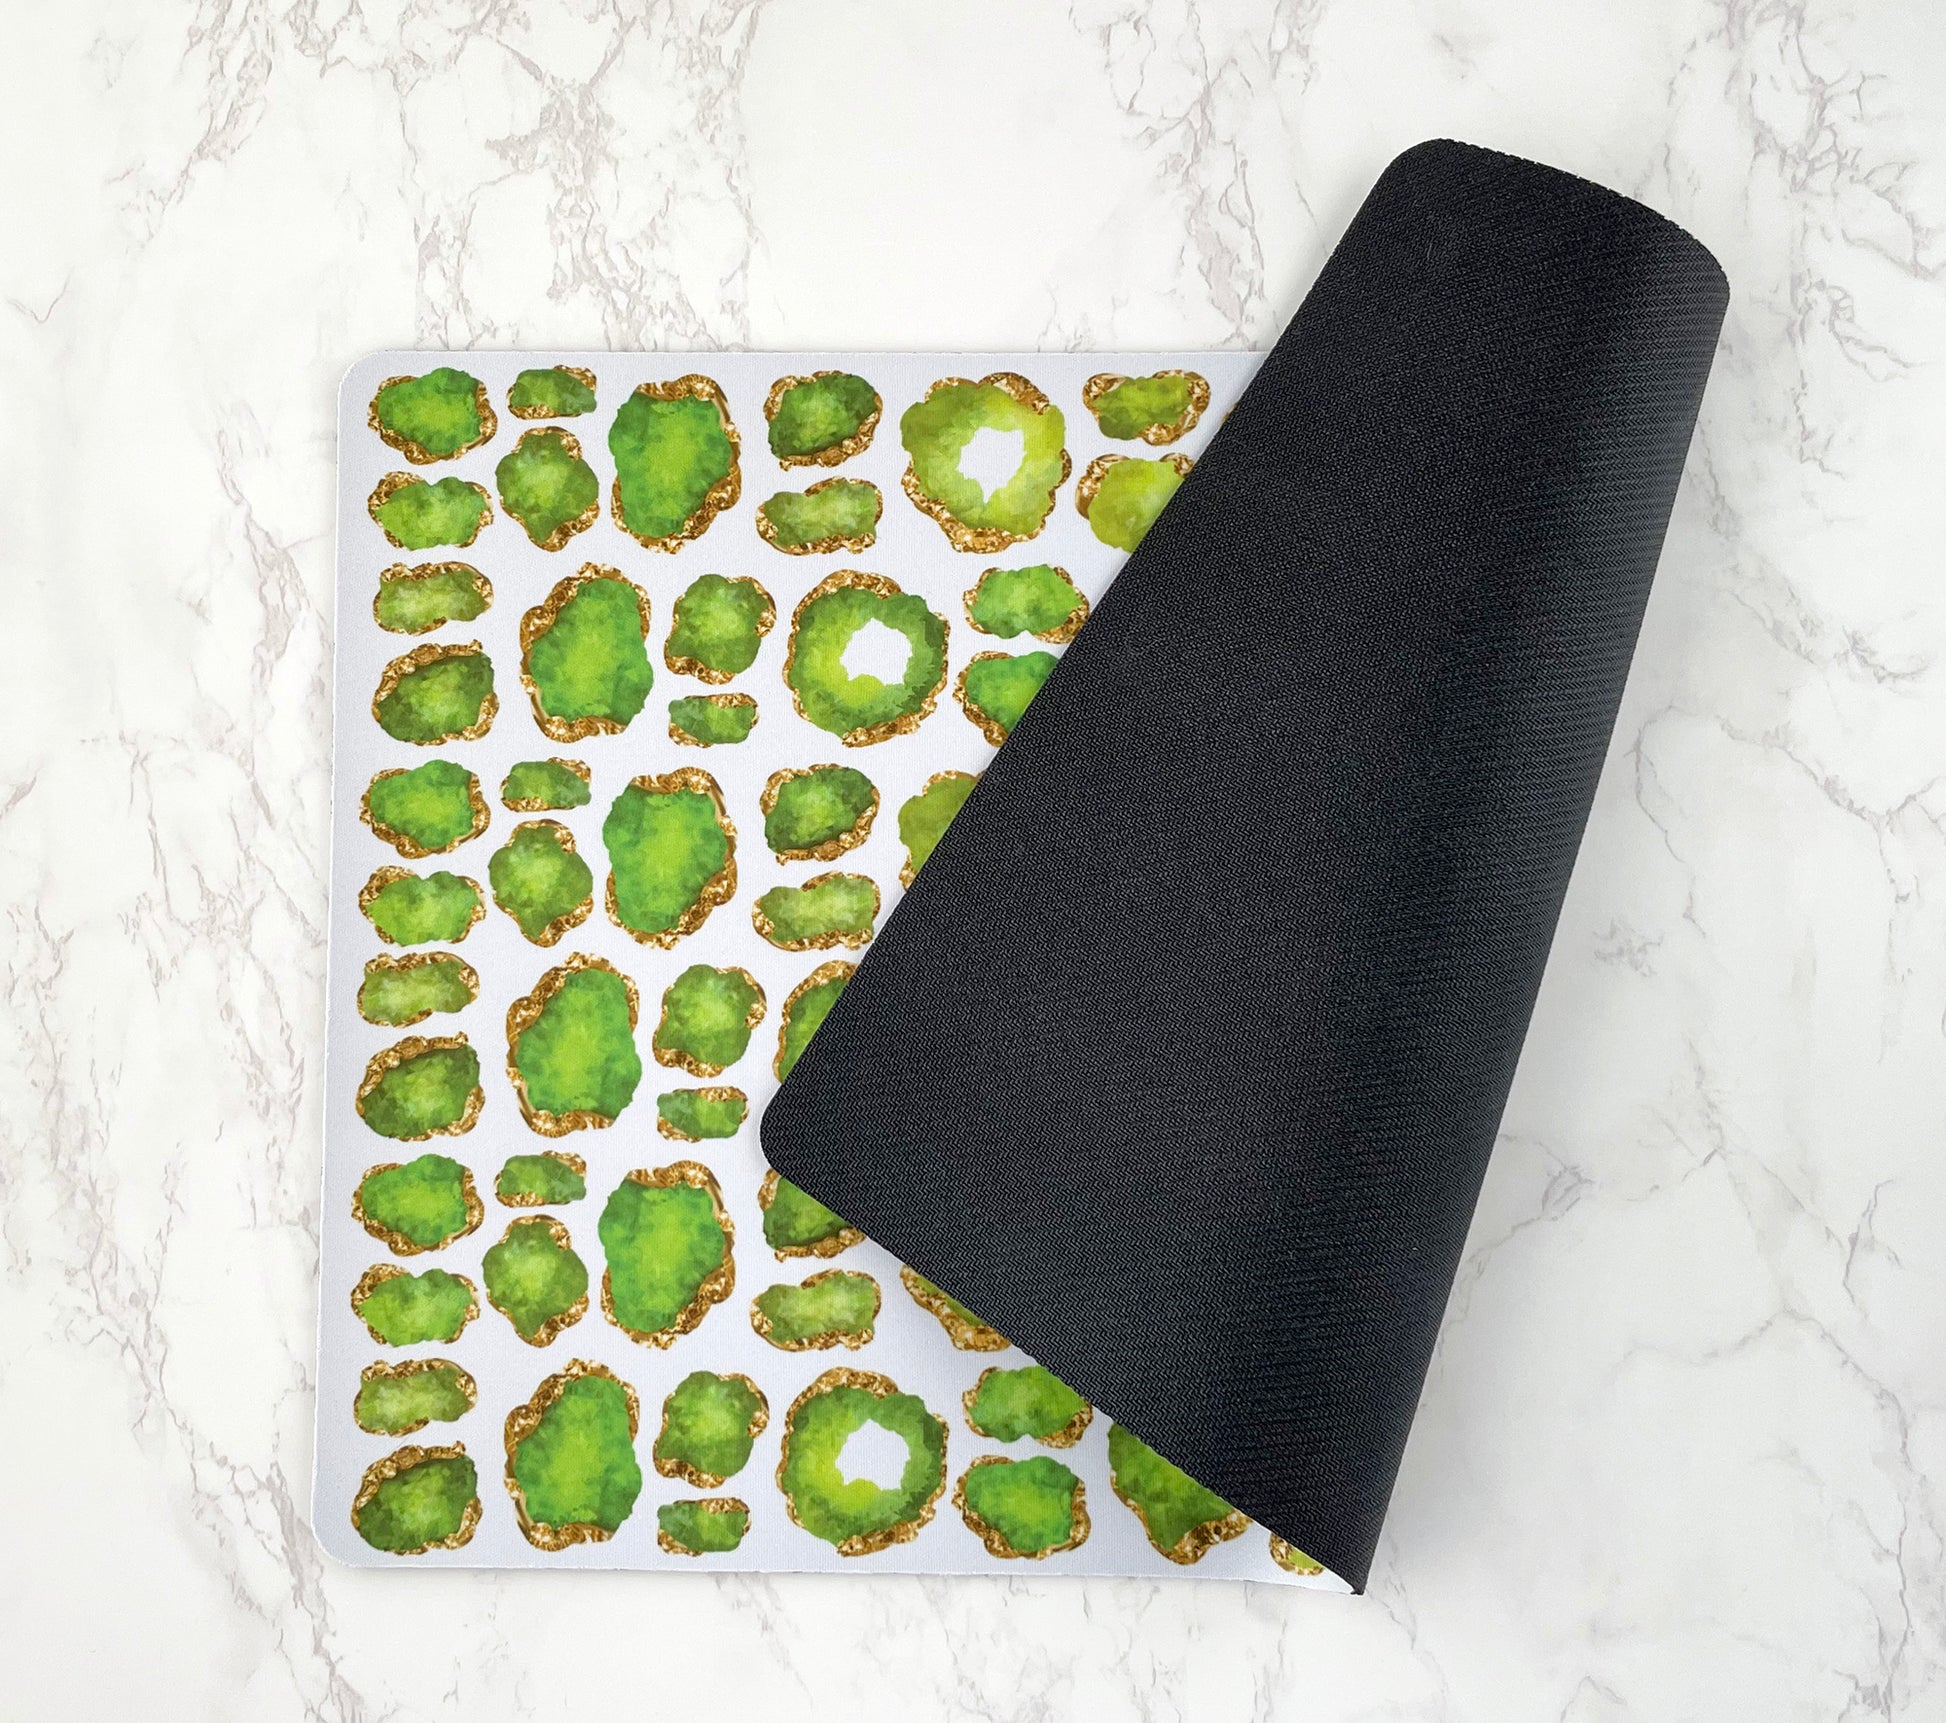 Pet Placemat has gemstone print in green & gold with black rubber backing.